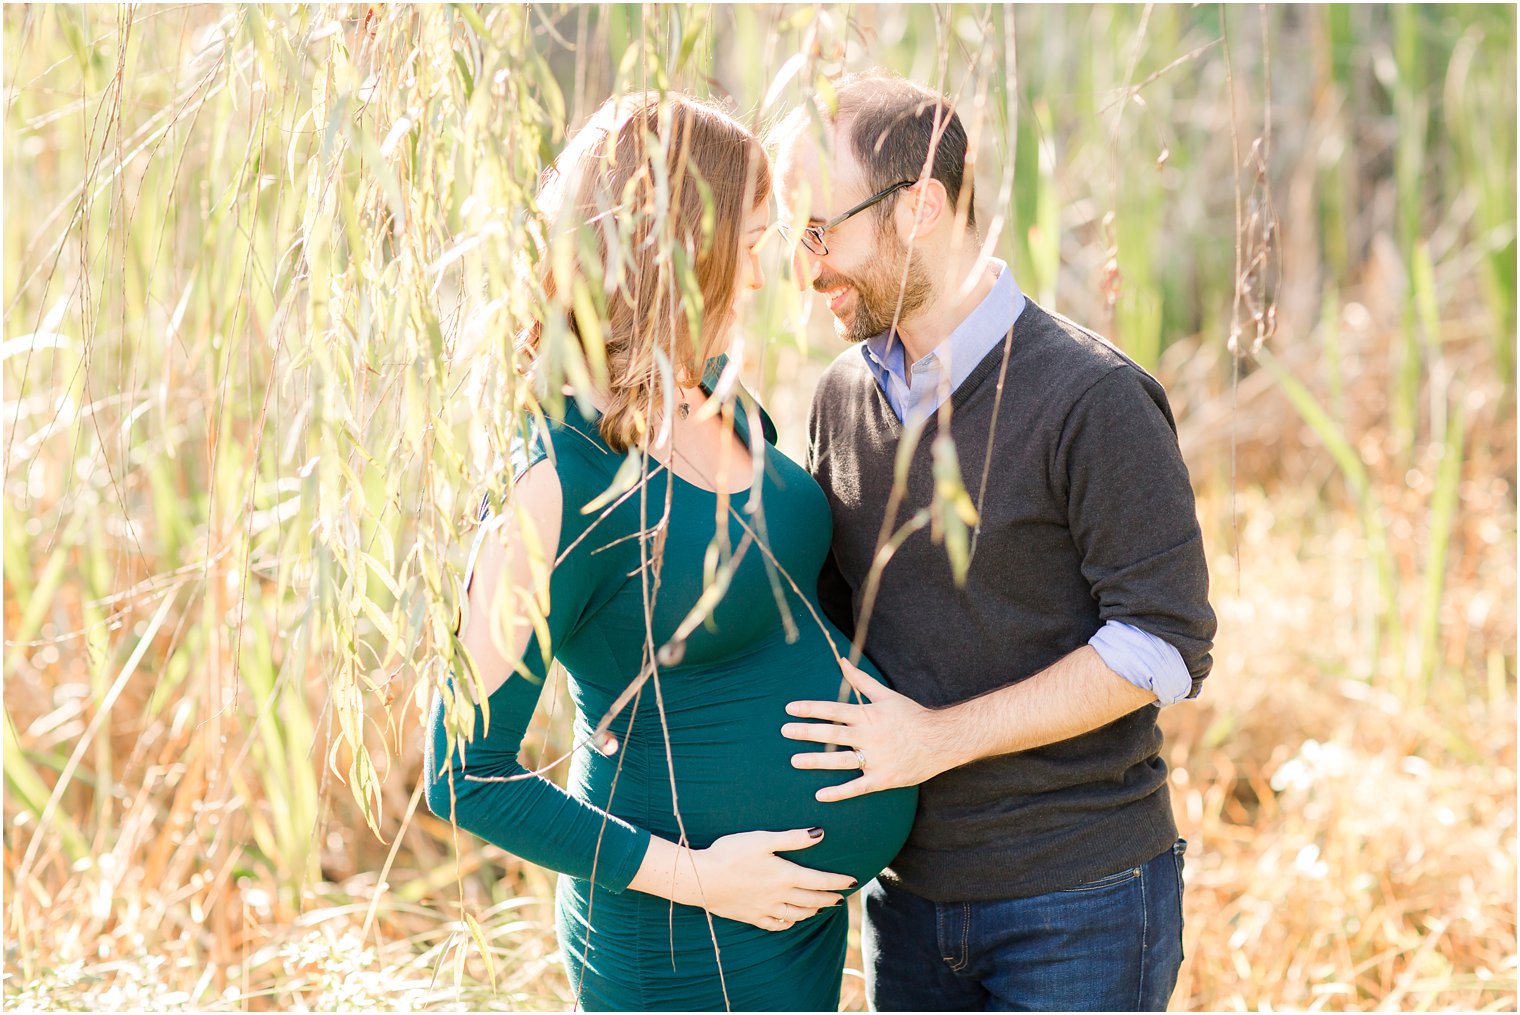 Romantic maternity photo in willow trees